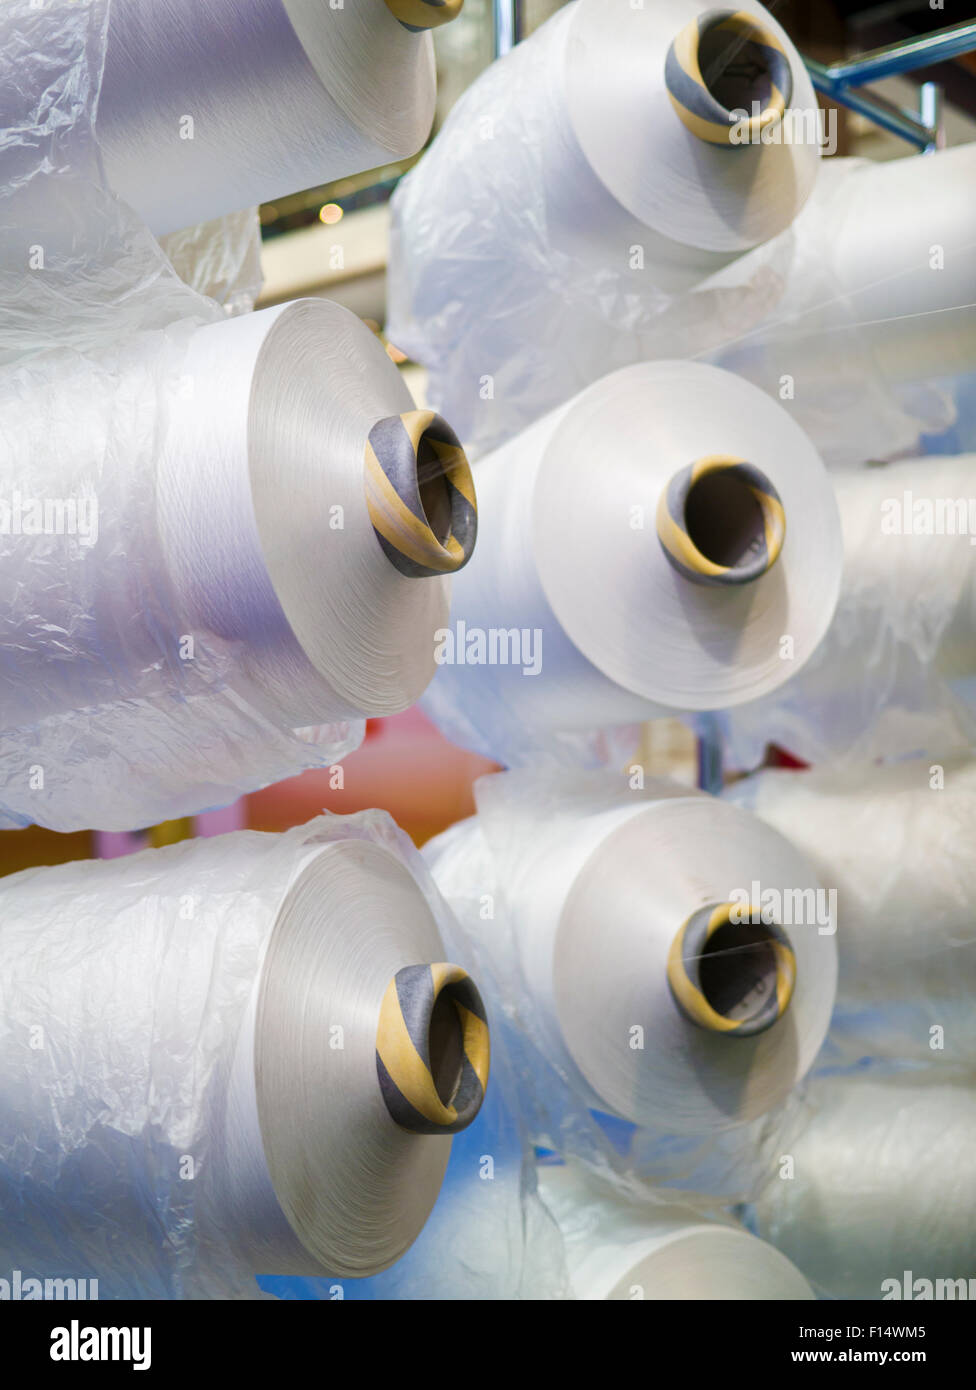 Textile industry - yarn spools on spinning machine in a textile factory Stock Photo